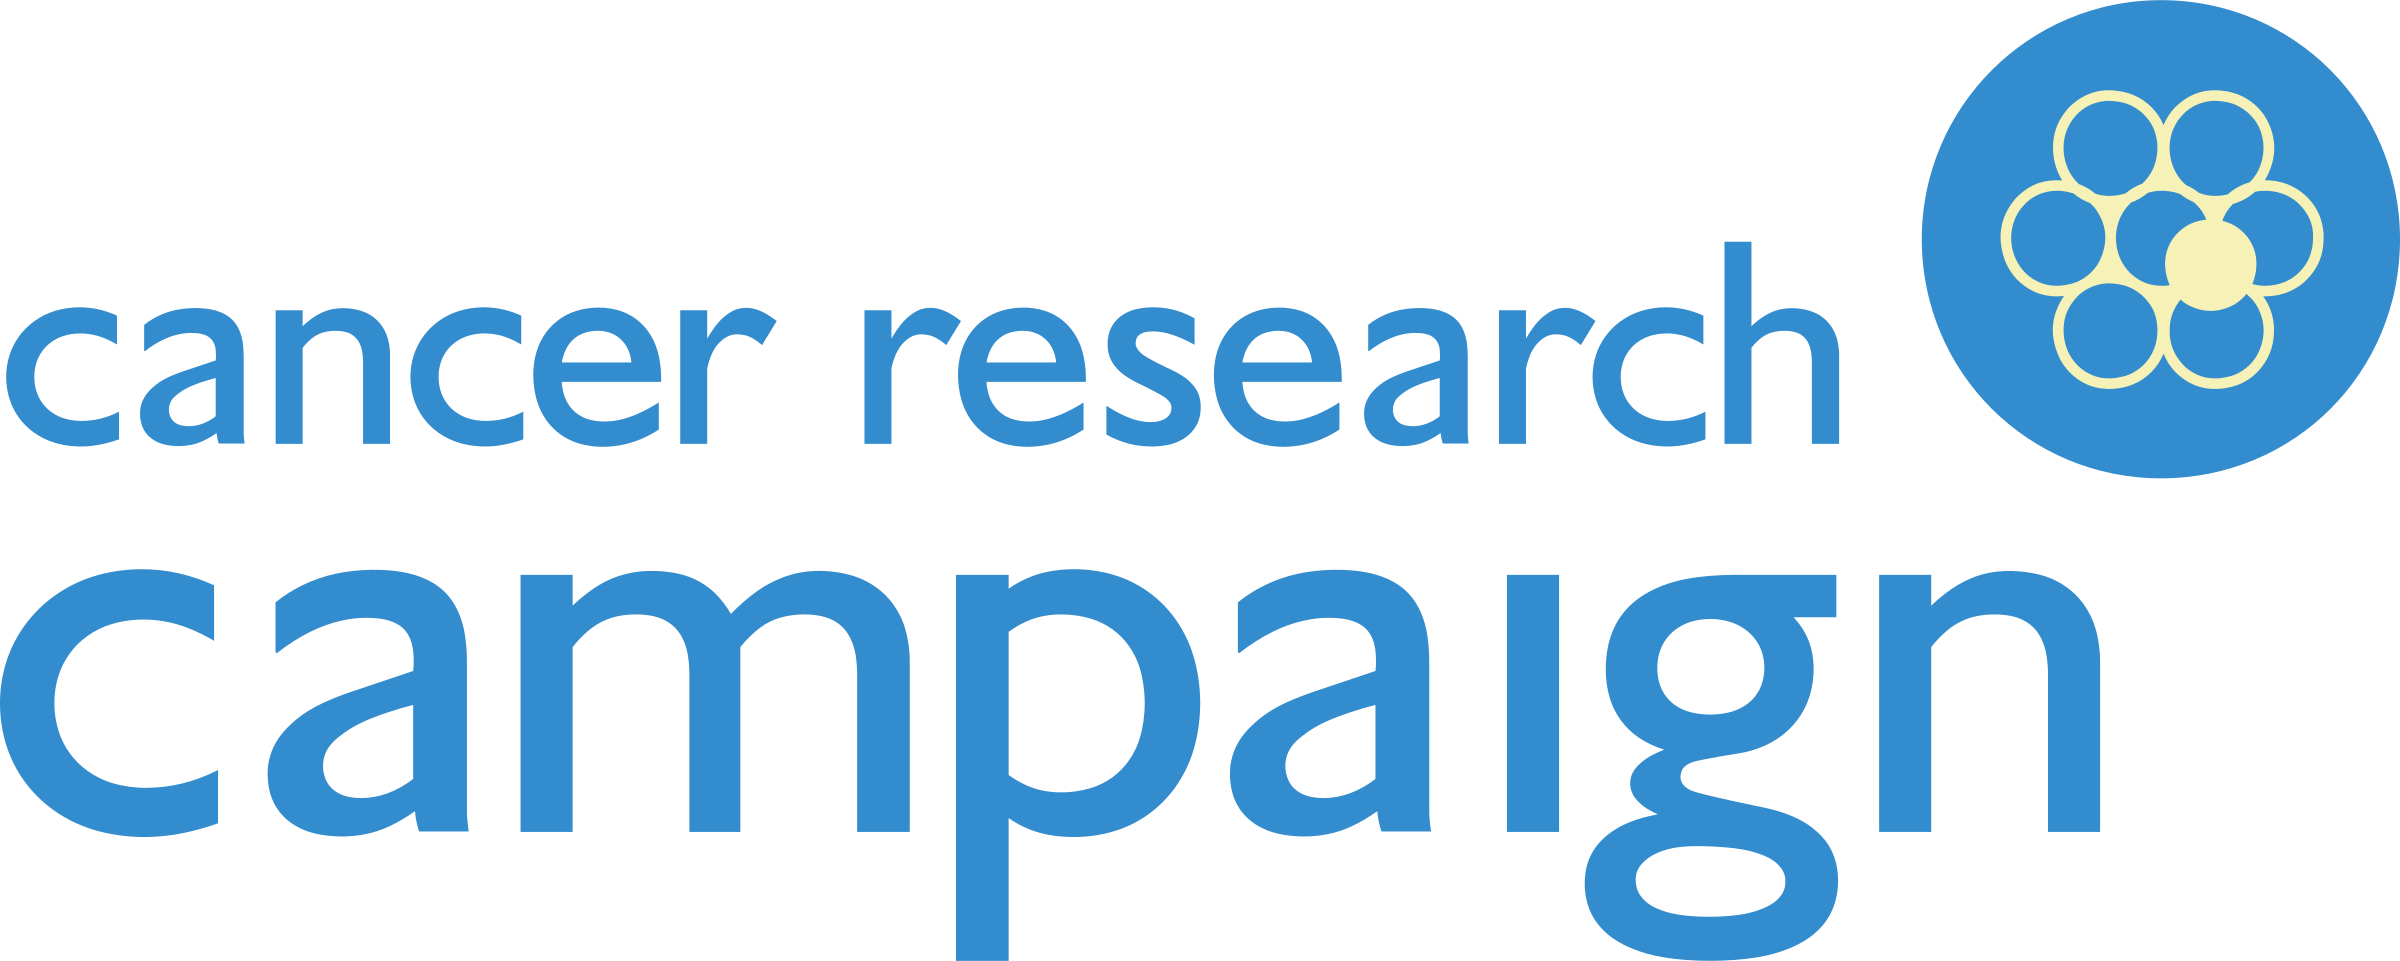 Cancer Research Campaign Logo Png Transparent - Cancer Research Campaign (2400x961)